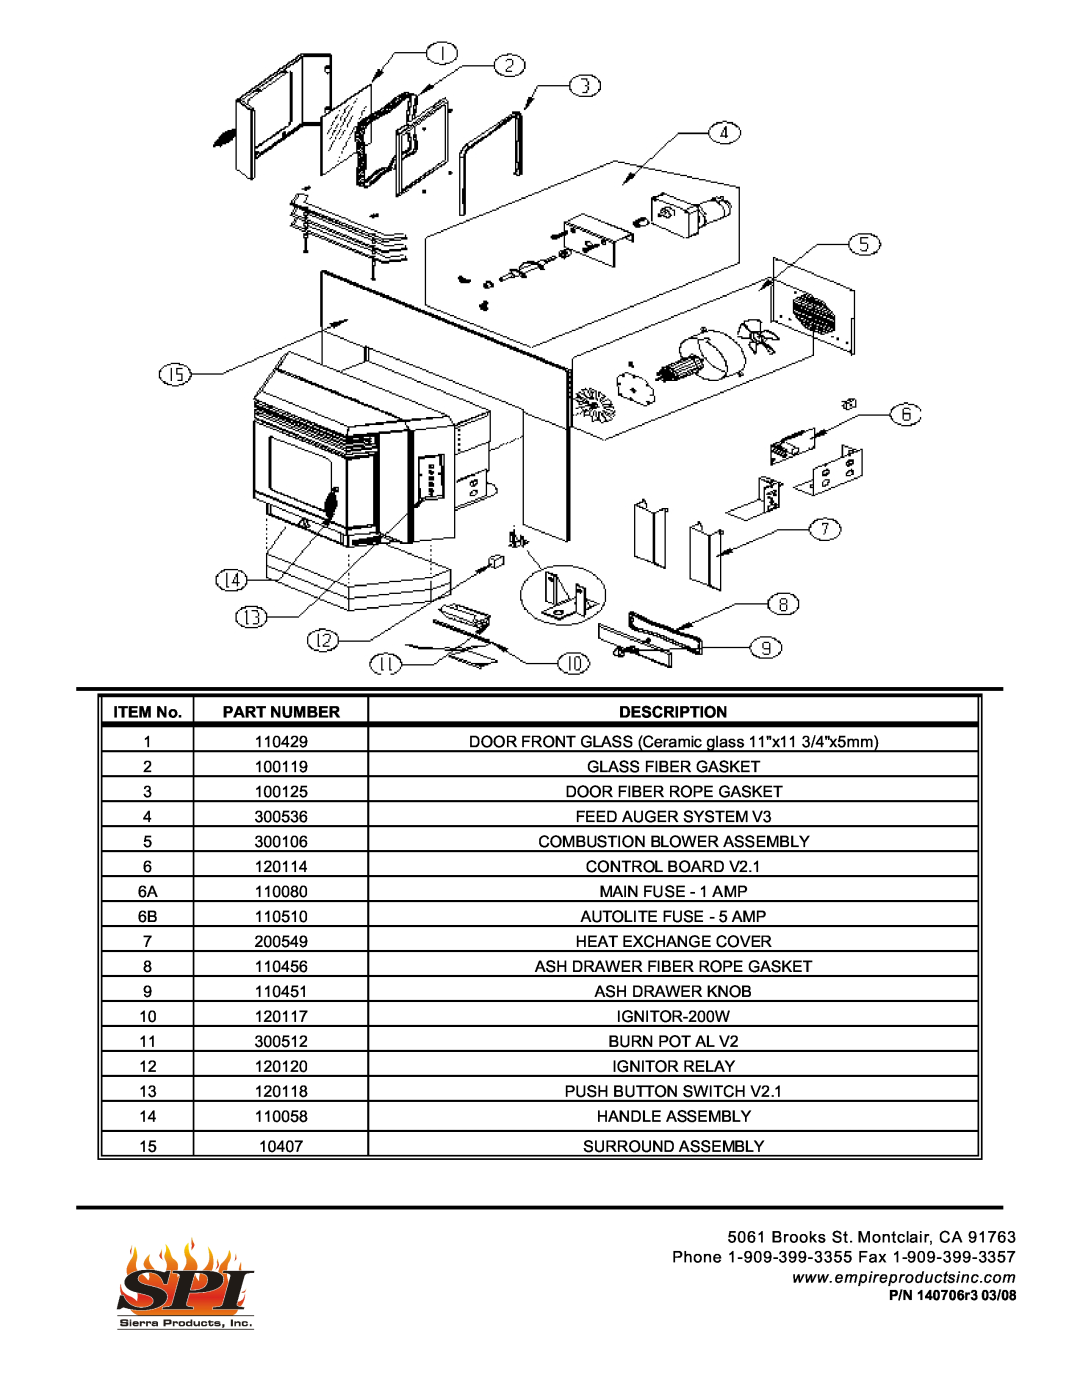 Sierra Products EF-4001B operating instructions ITEM No, Part Number, Description 